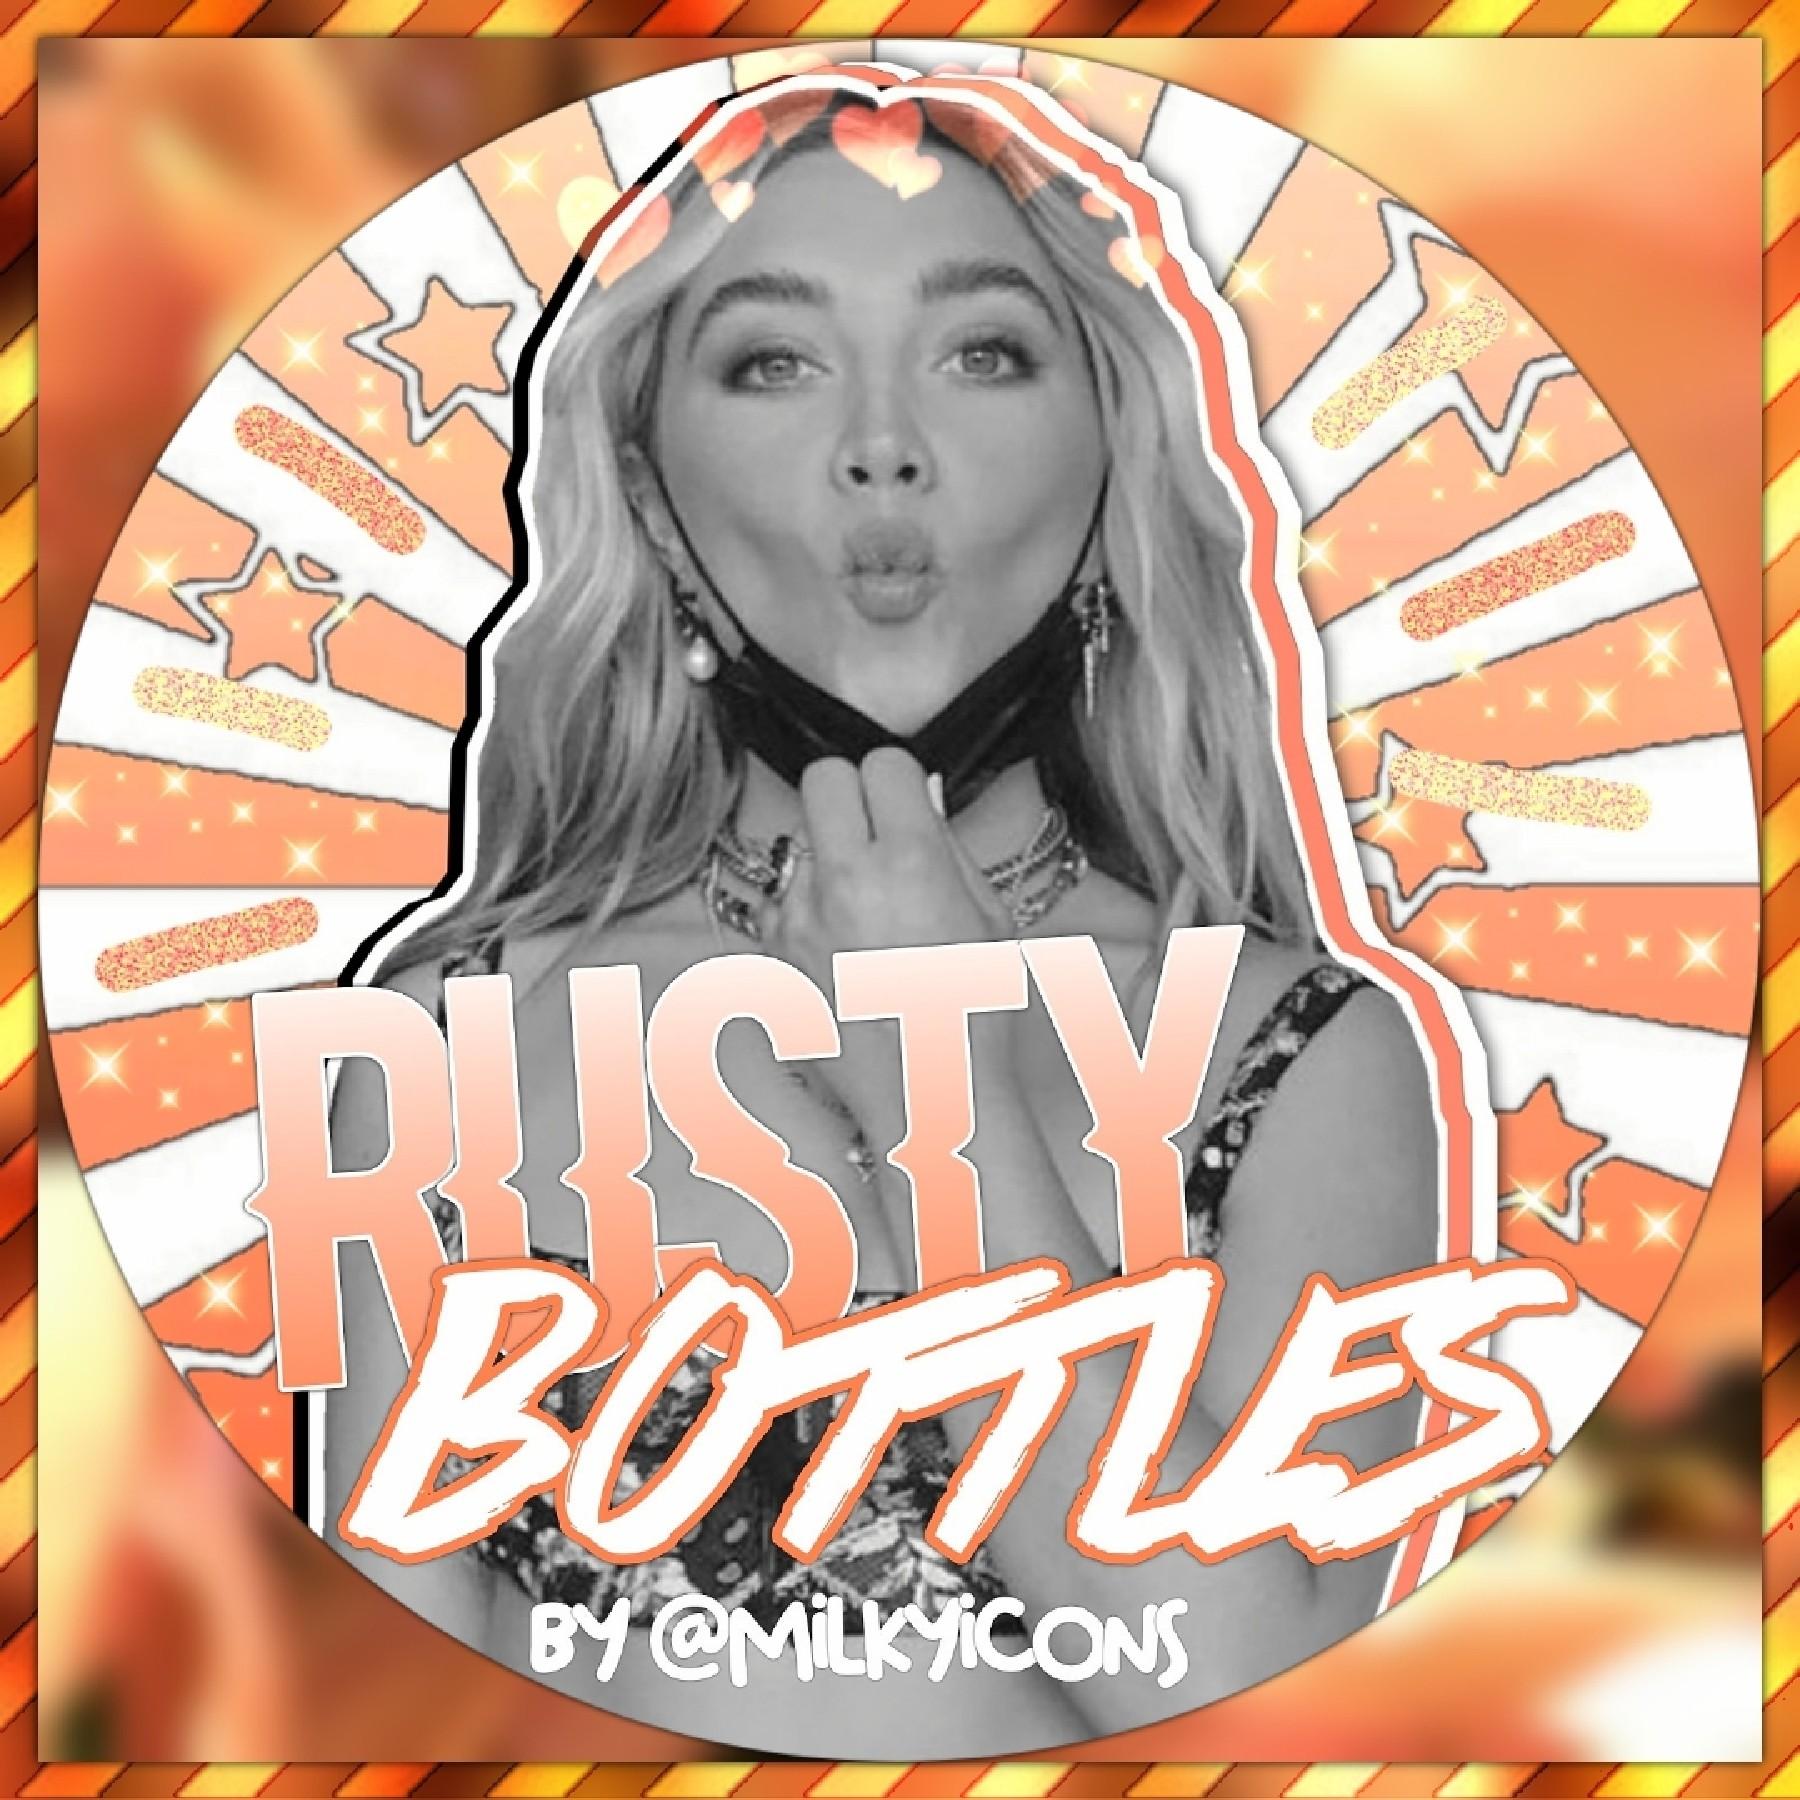 icon for: @rustybottles
style: simple
color: nectarine🧡🍑
hope you like it!! 😊❤️ pls give credits if used💗